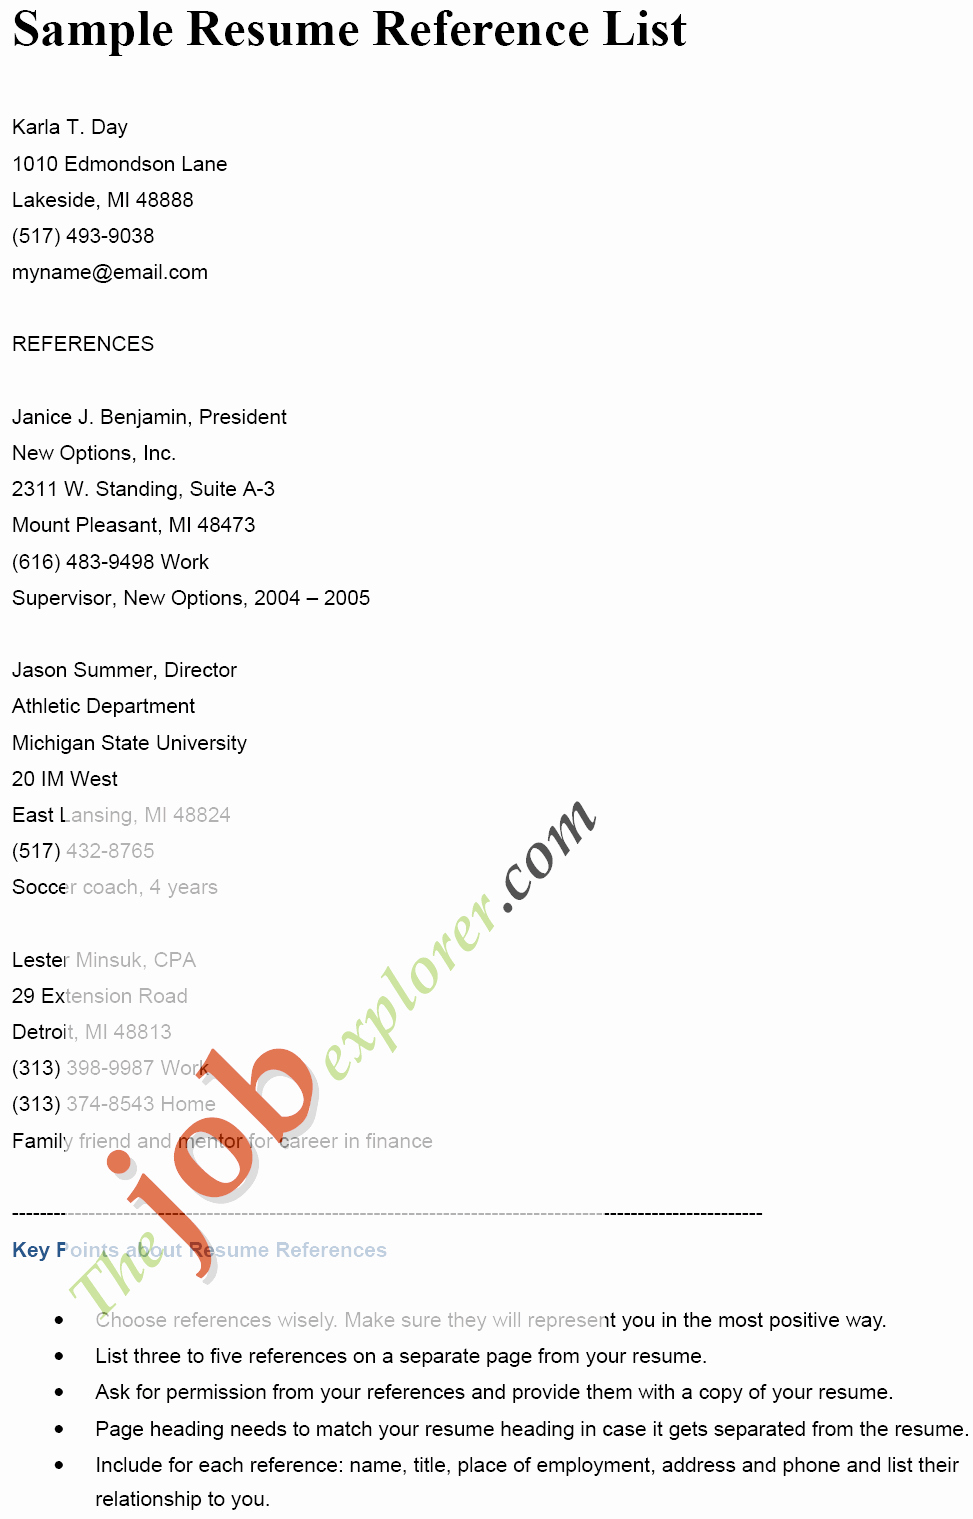 Reference List for A Job Awesome Copy A Professional Reference List – Perfect Resume format